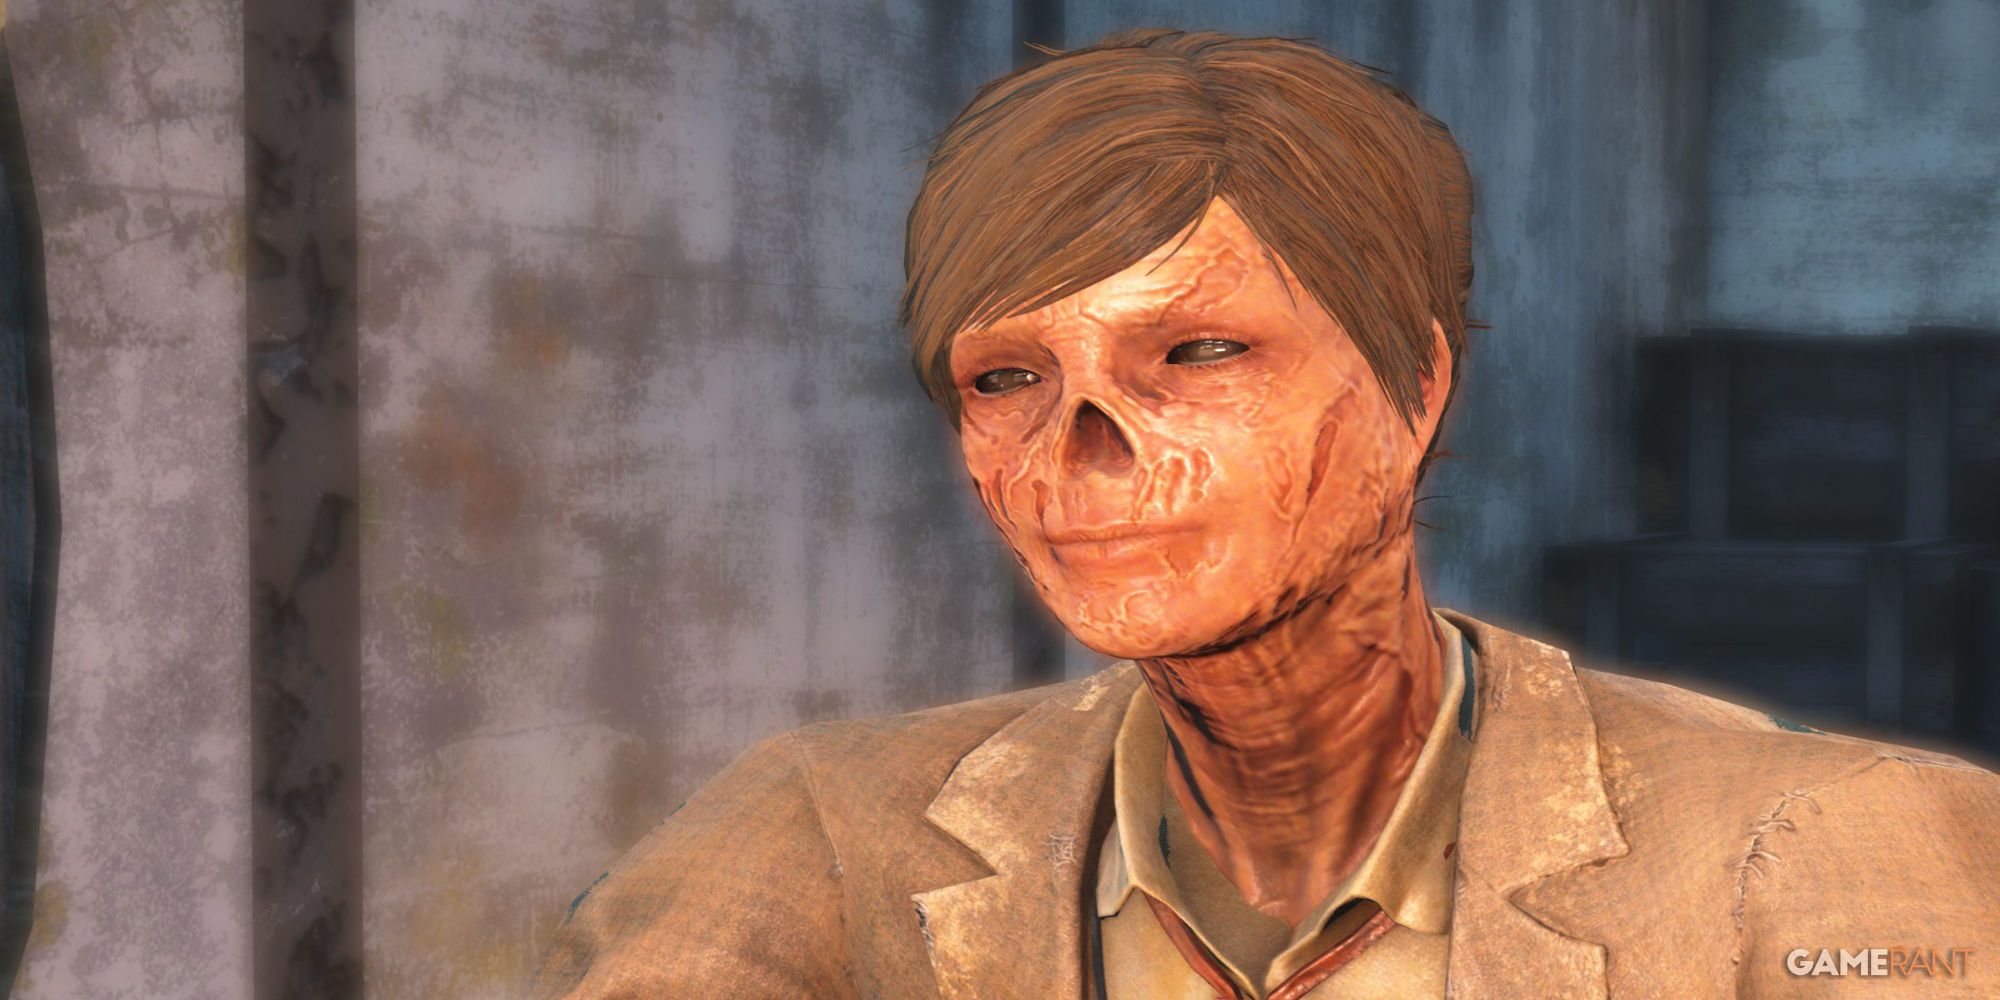 Daisy the Ghoul merchant in Fallout 4